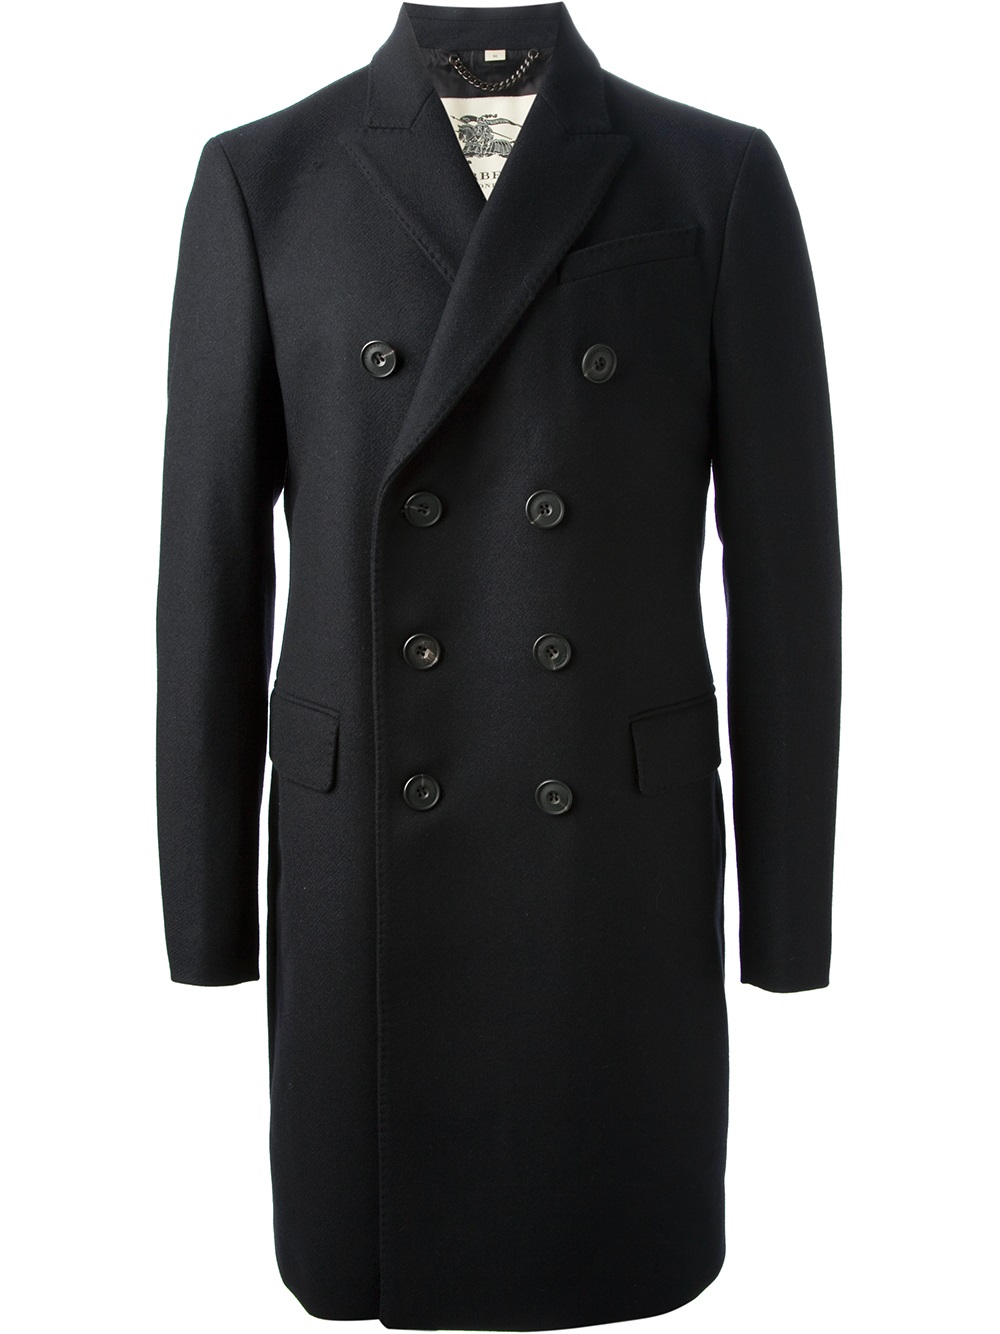 Lyst - Burberry Double Breasted Overcoat in Blue for Men